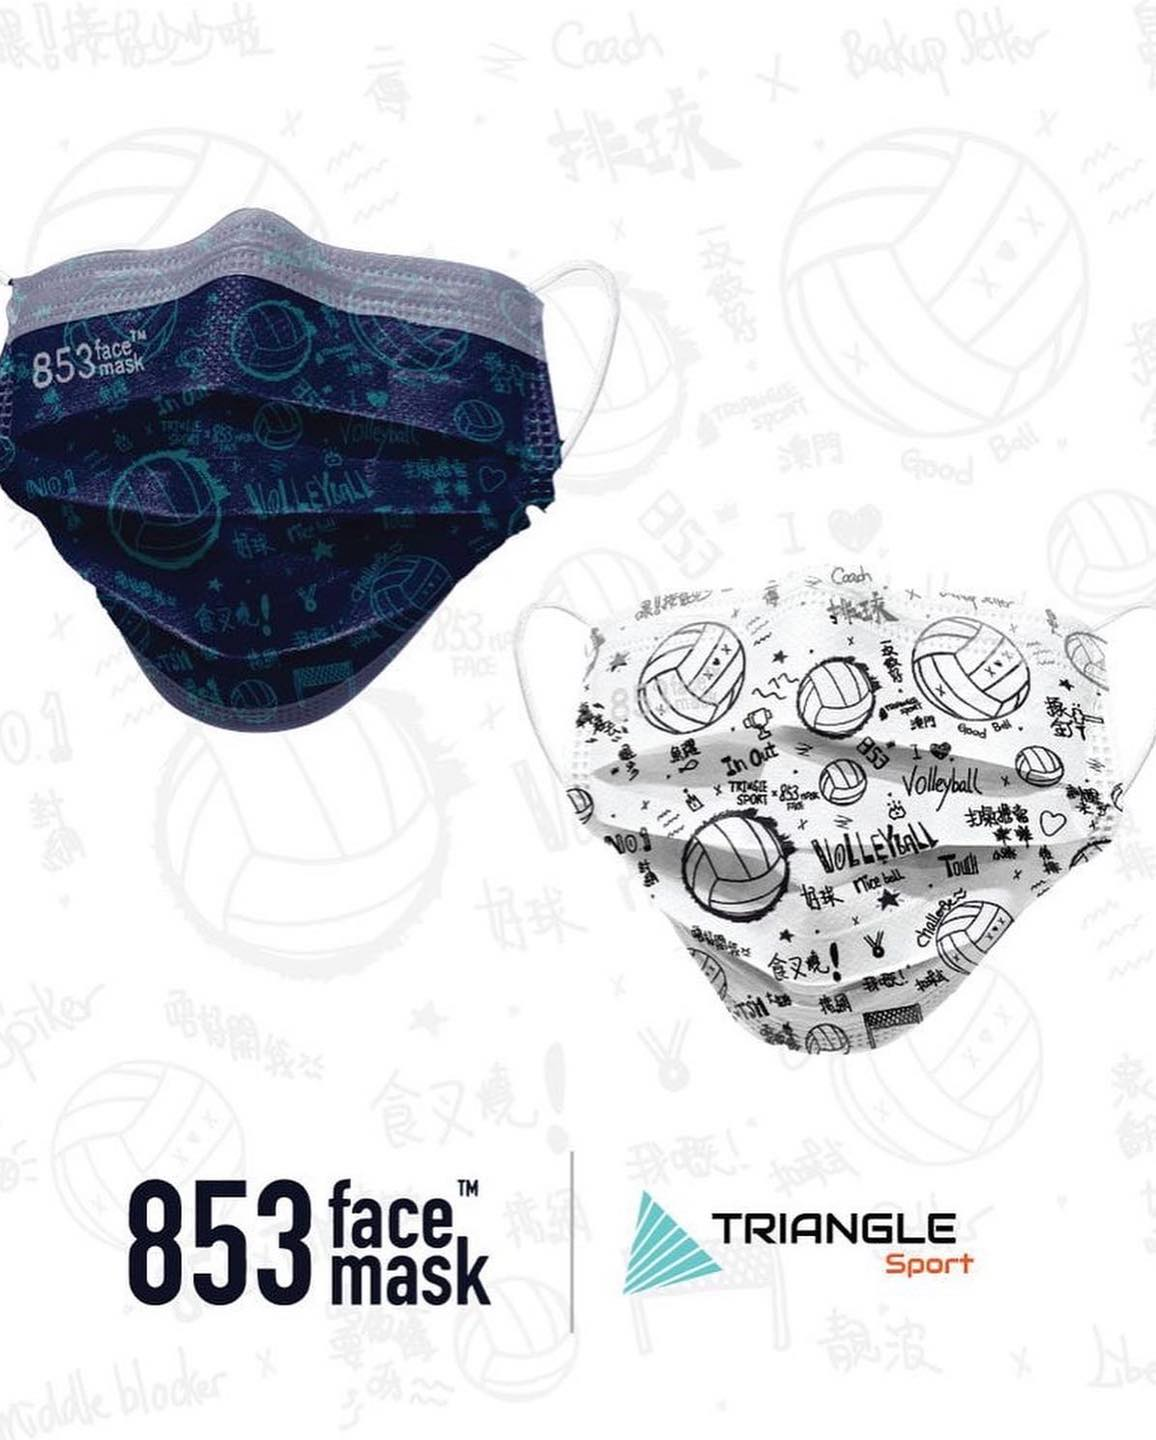 ASTM Level 3 口罩（853 Face Mask™️x TRIANGLE Sport 藍）非獨立包裝10片